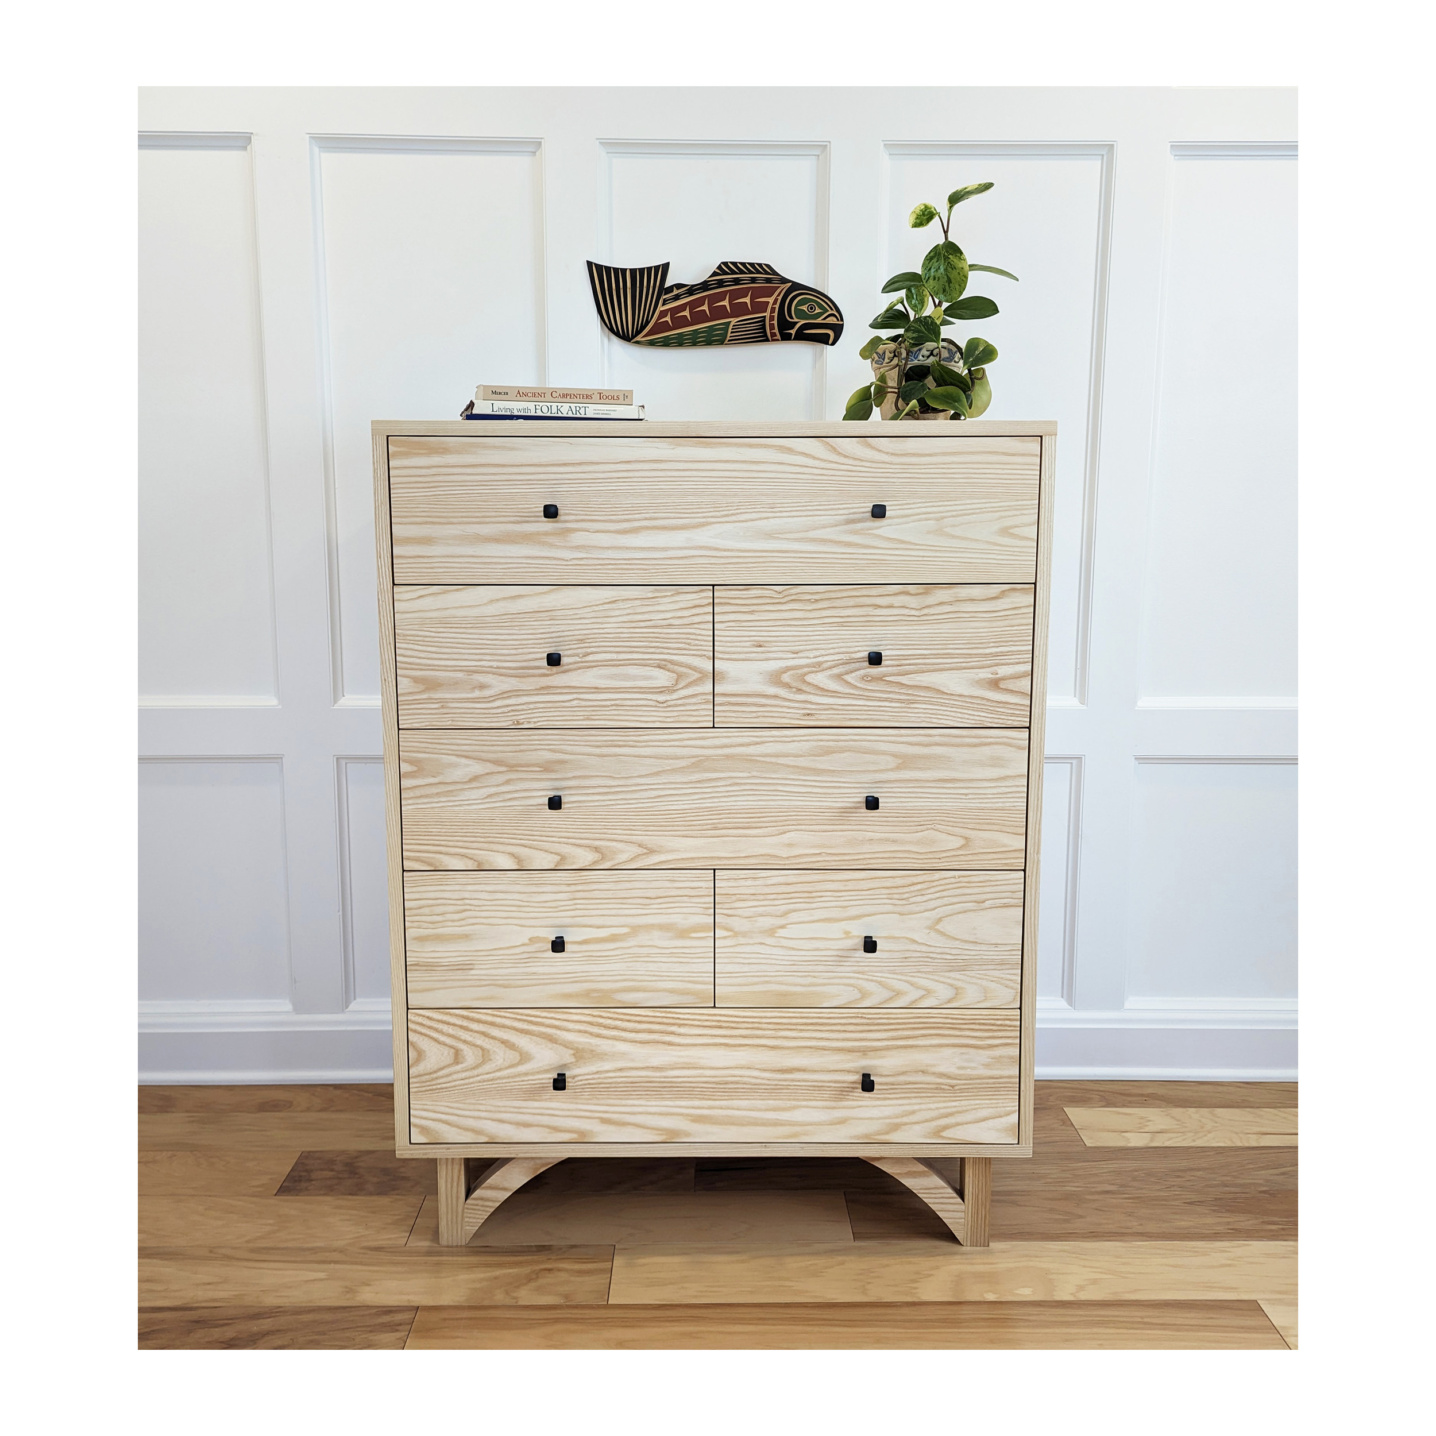 Solid Wood Tall Dresser--made in Ash Wood